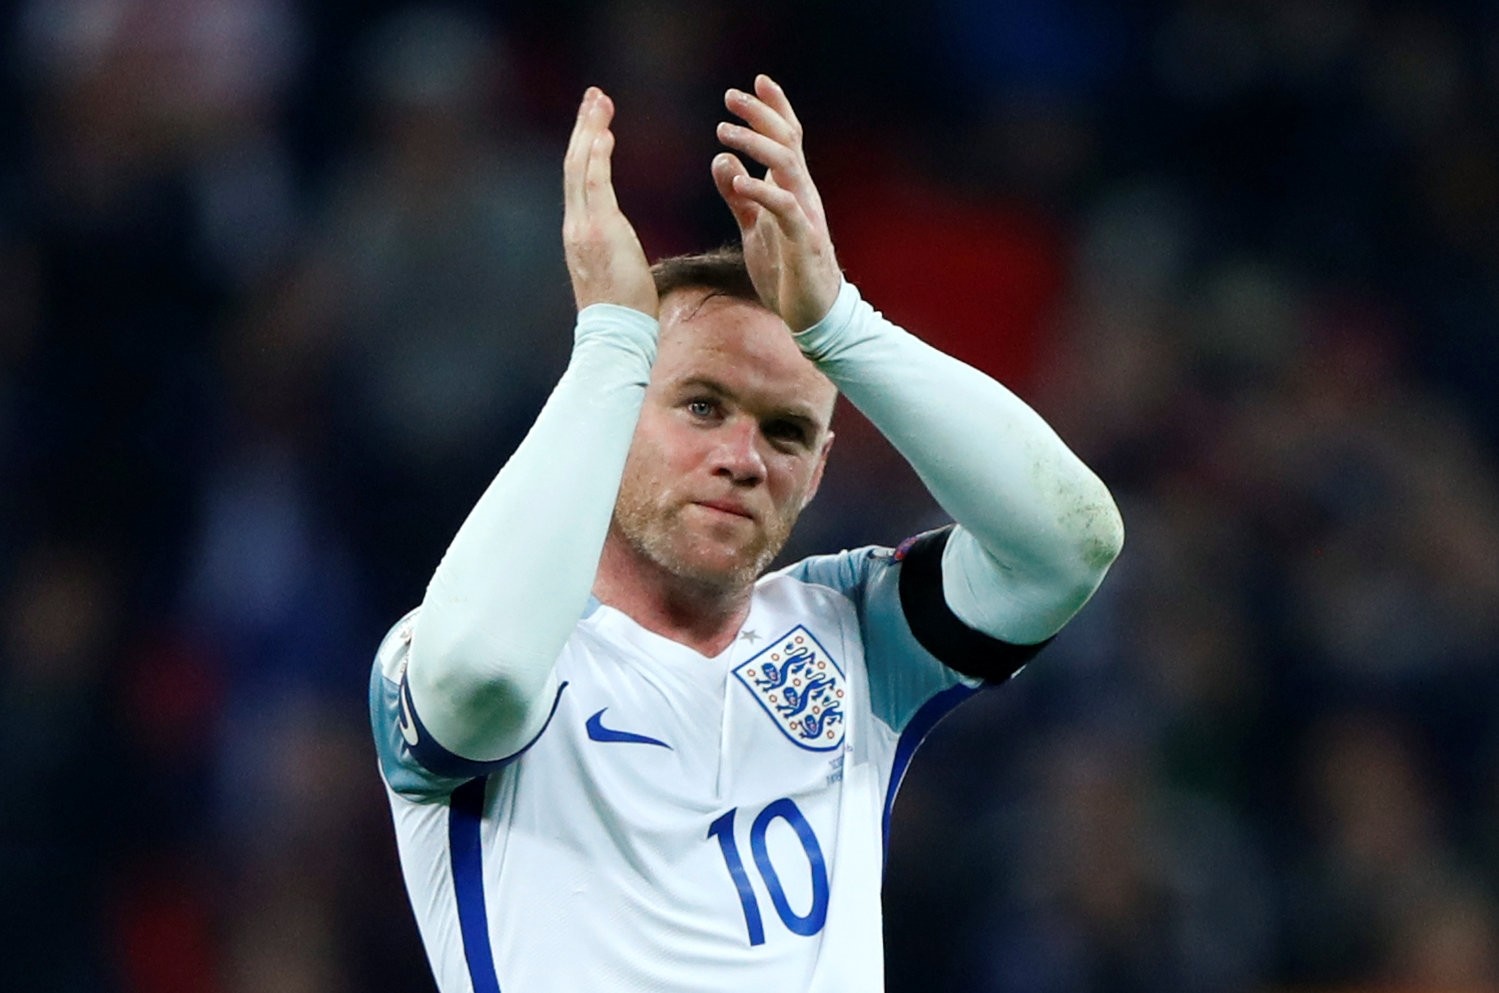 England's Wayne Rooney applauds fans after the game. (REUTERS Photo)